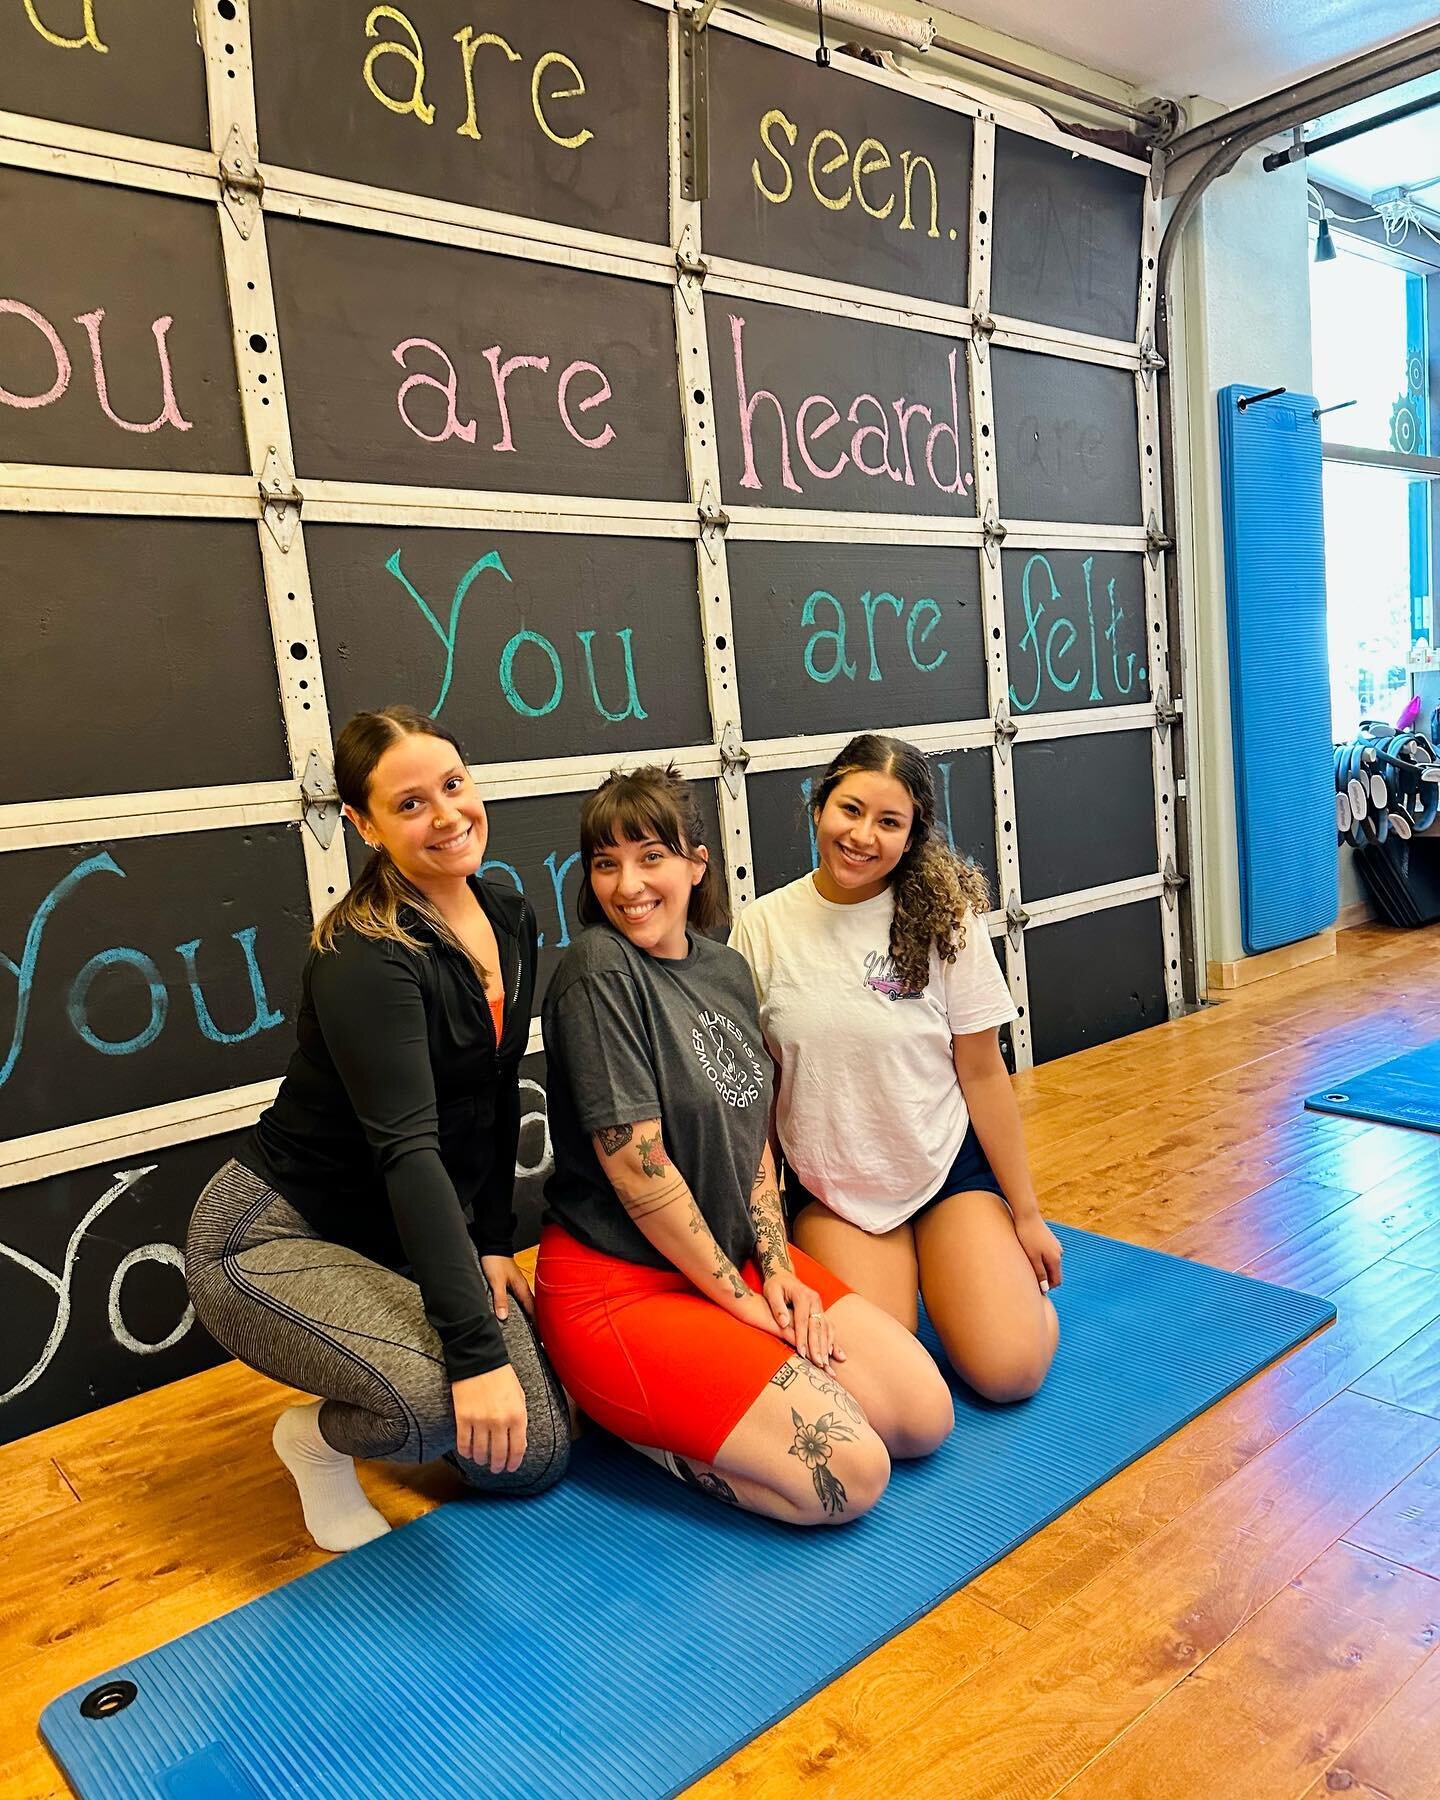 Yesterday&rsquo;s mat class was the perfect way to ease your body and mind into the weekend. 

After a class filled with deep breathing, spinal organization, joint mobility, and some foam rolling, we hope you feel prepared to receive rest and rejuven